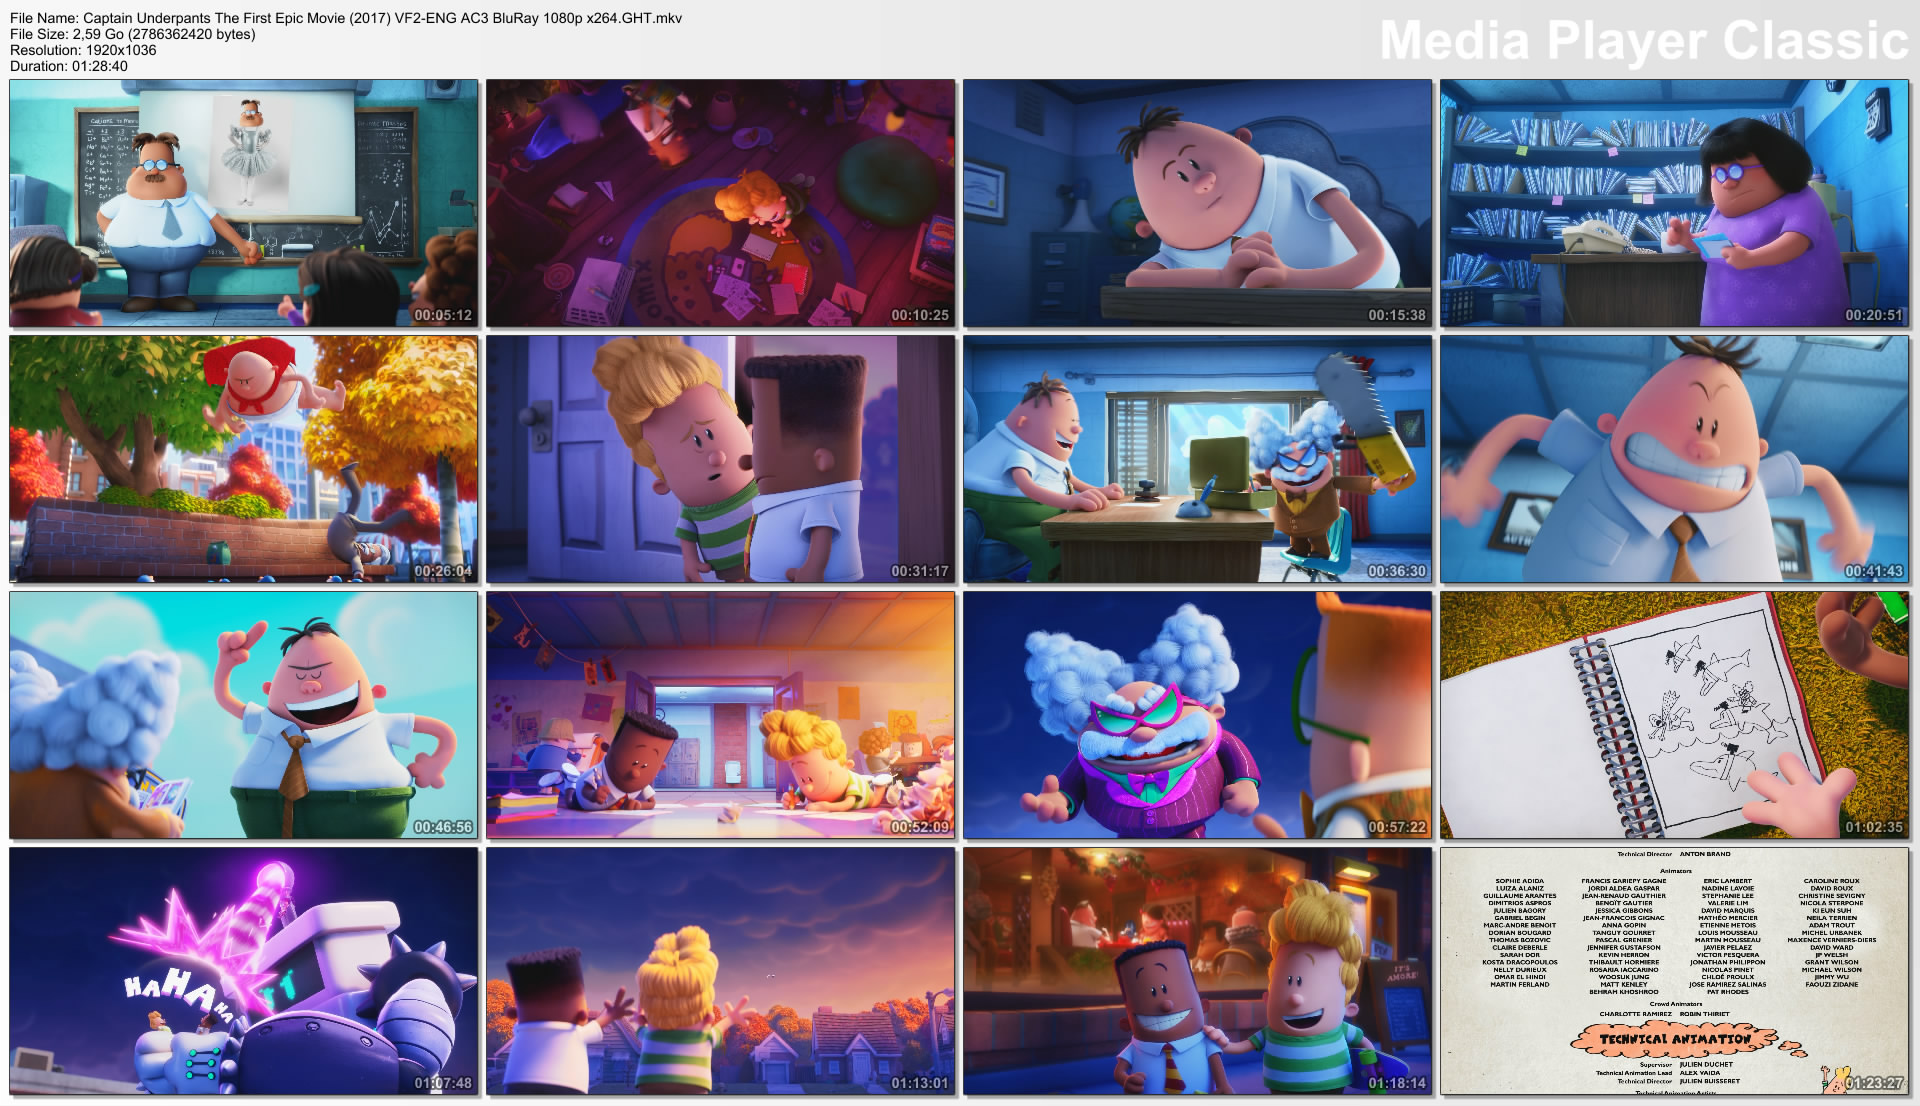 Captain Underpants The First Epic Movie (2017) VF2-ENG AC3 BluRay 1080p x264.GHT